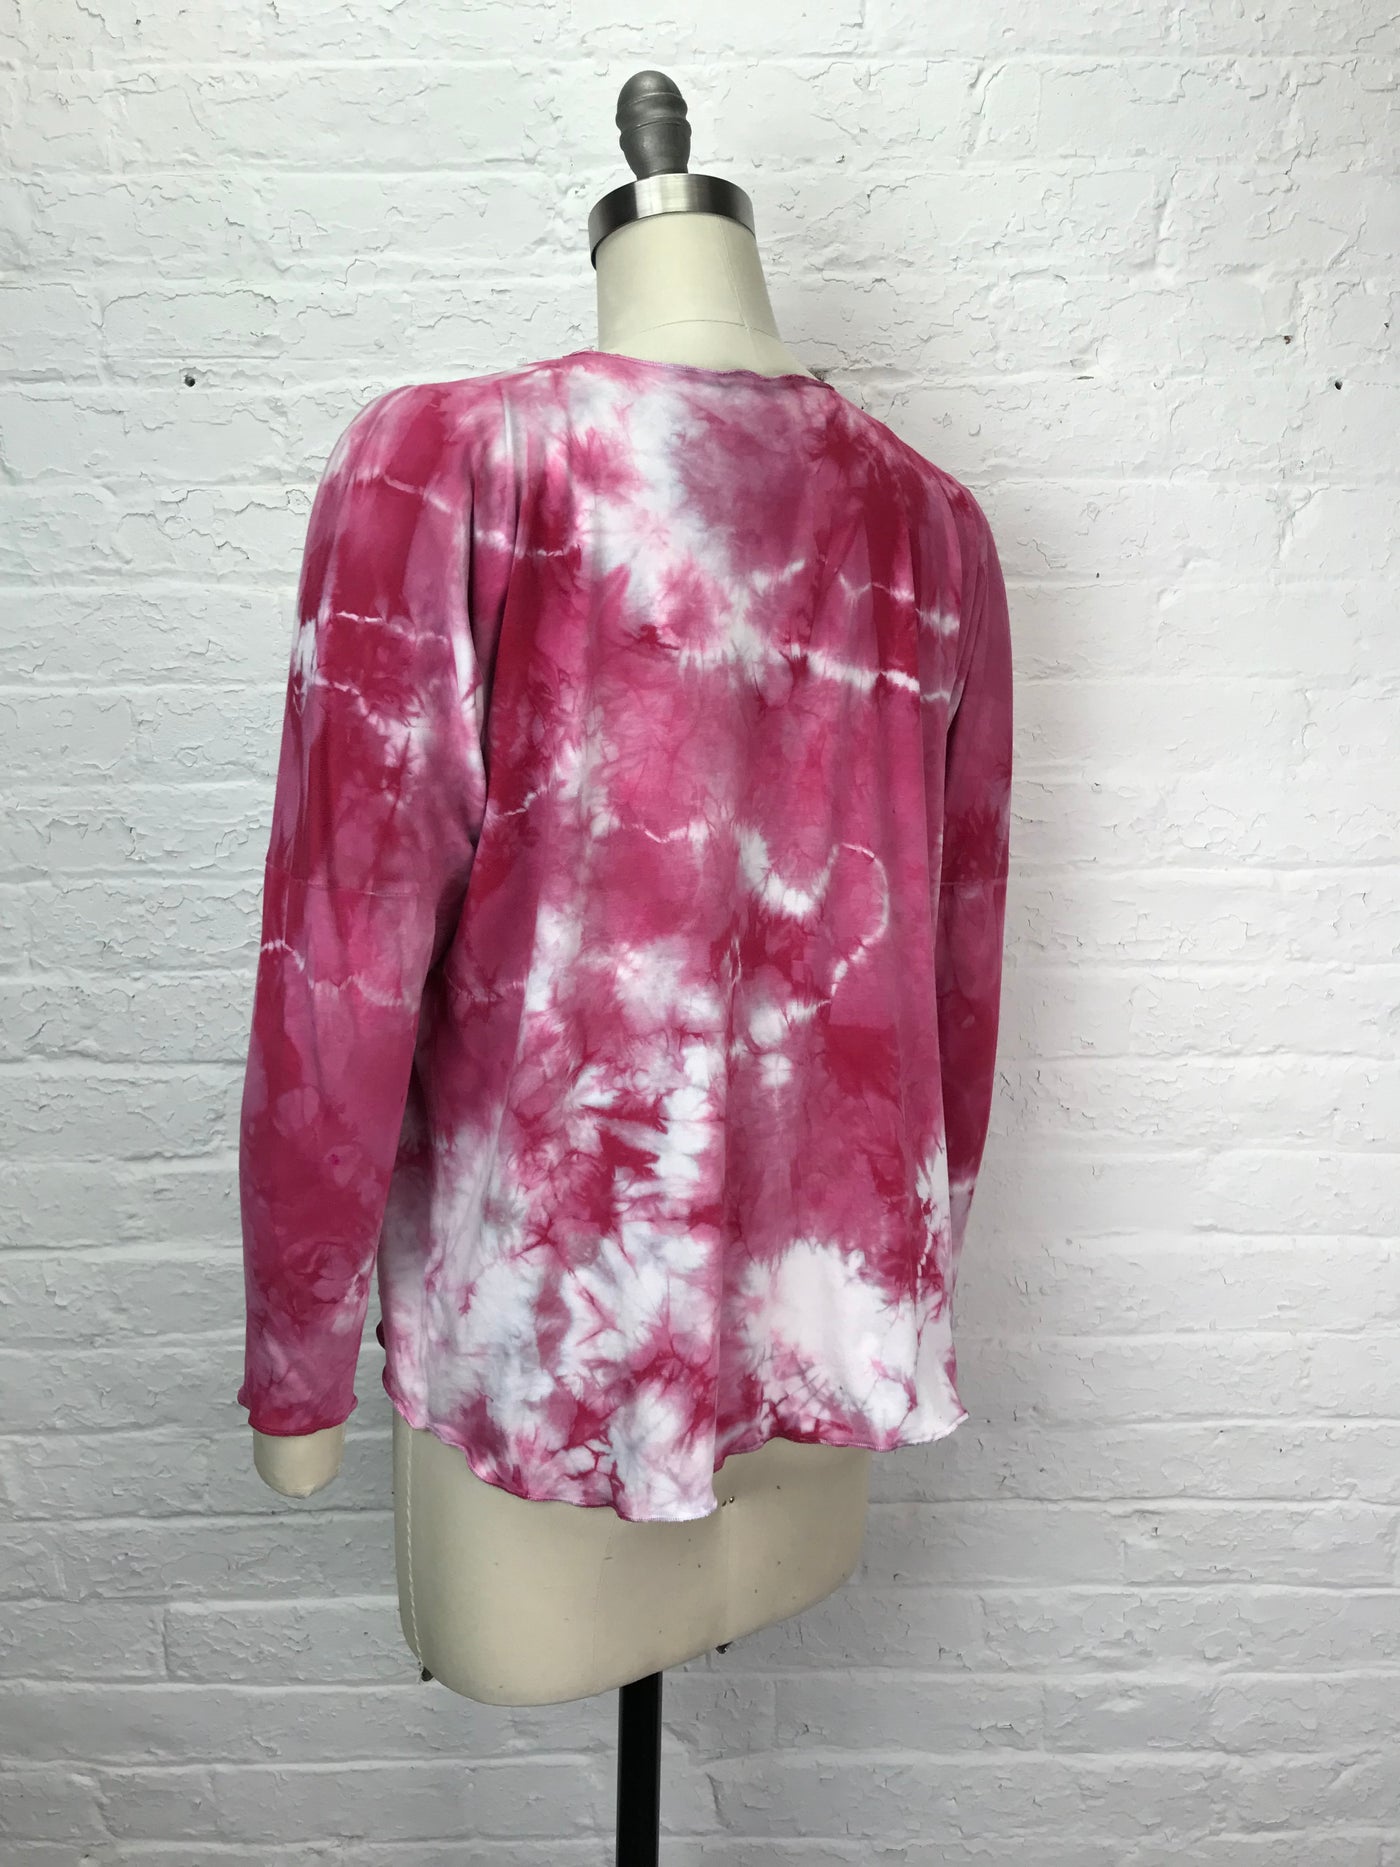 Juni Long Sleeve Shirt in Cherry Blossom Tangle - One Size